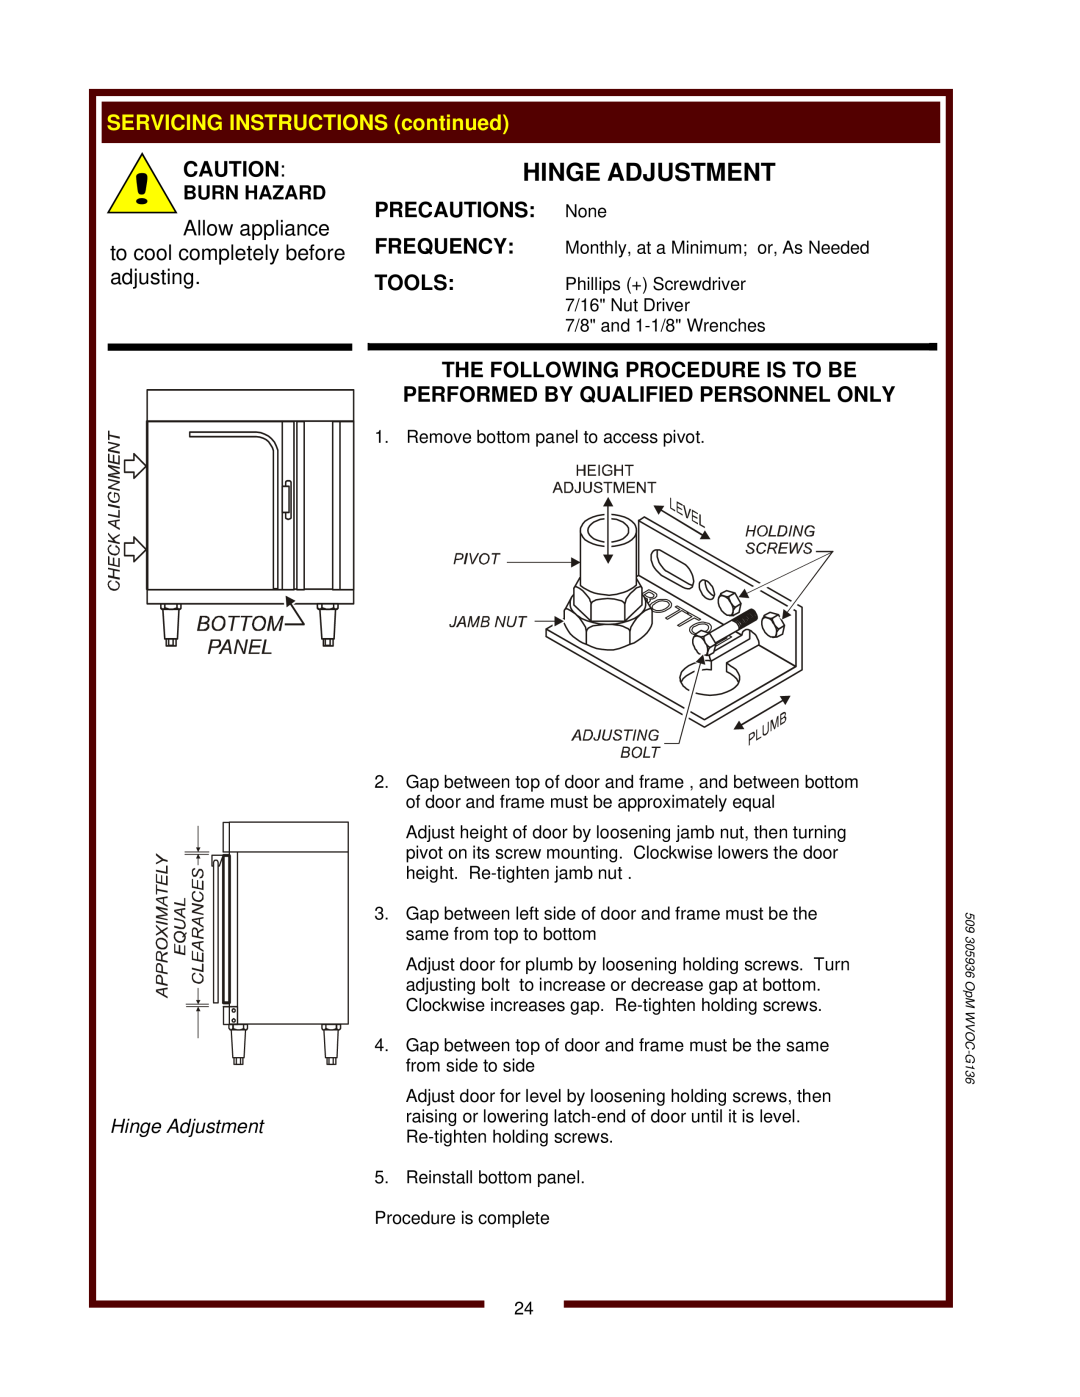 Bloomfield WVOC-G136 Hinge Adjustment, SERVICING INSTRUCTIONS continued, Precautions, Frequency, Tools, Burn Hazard 